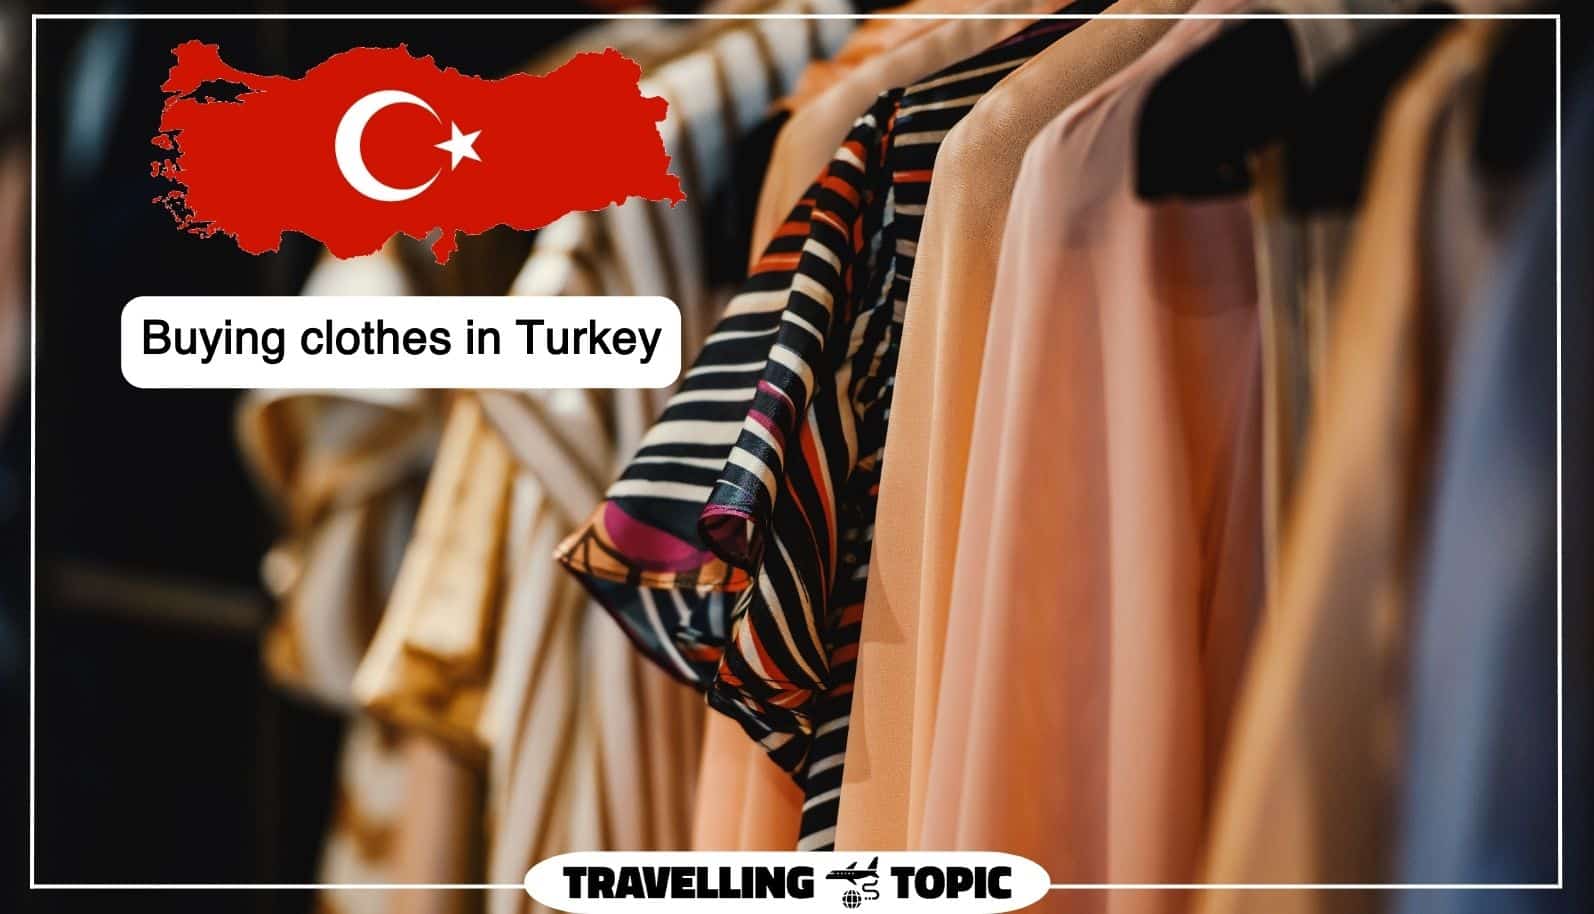 Buying clothes in Turkey